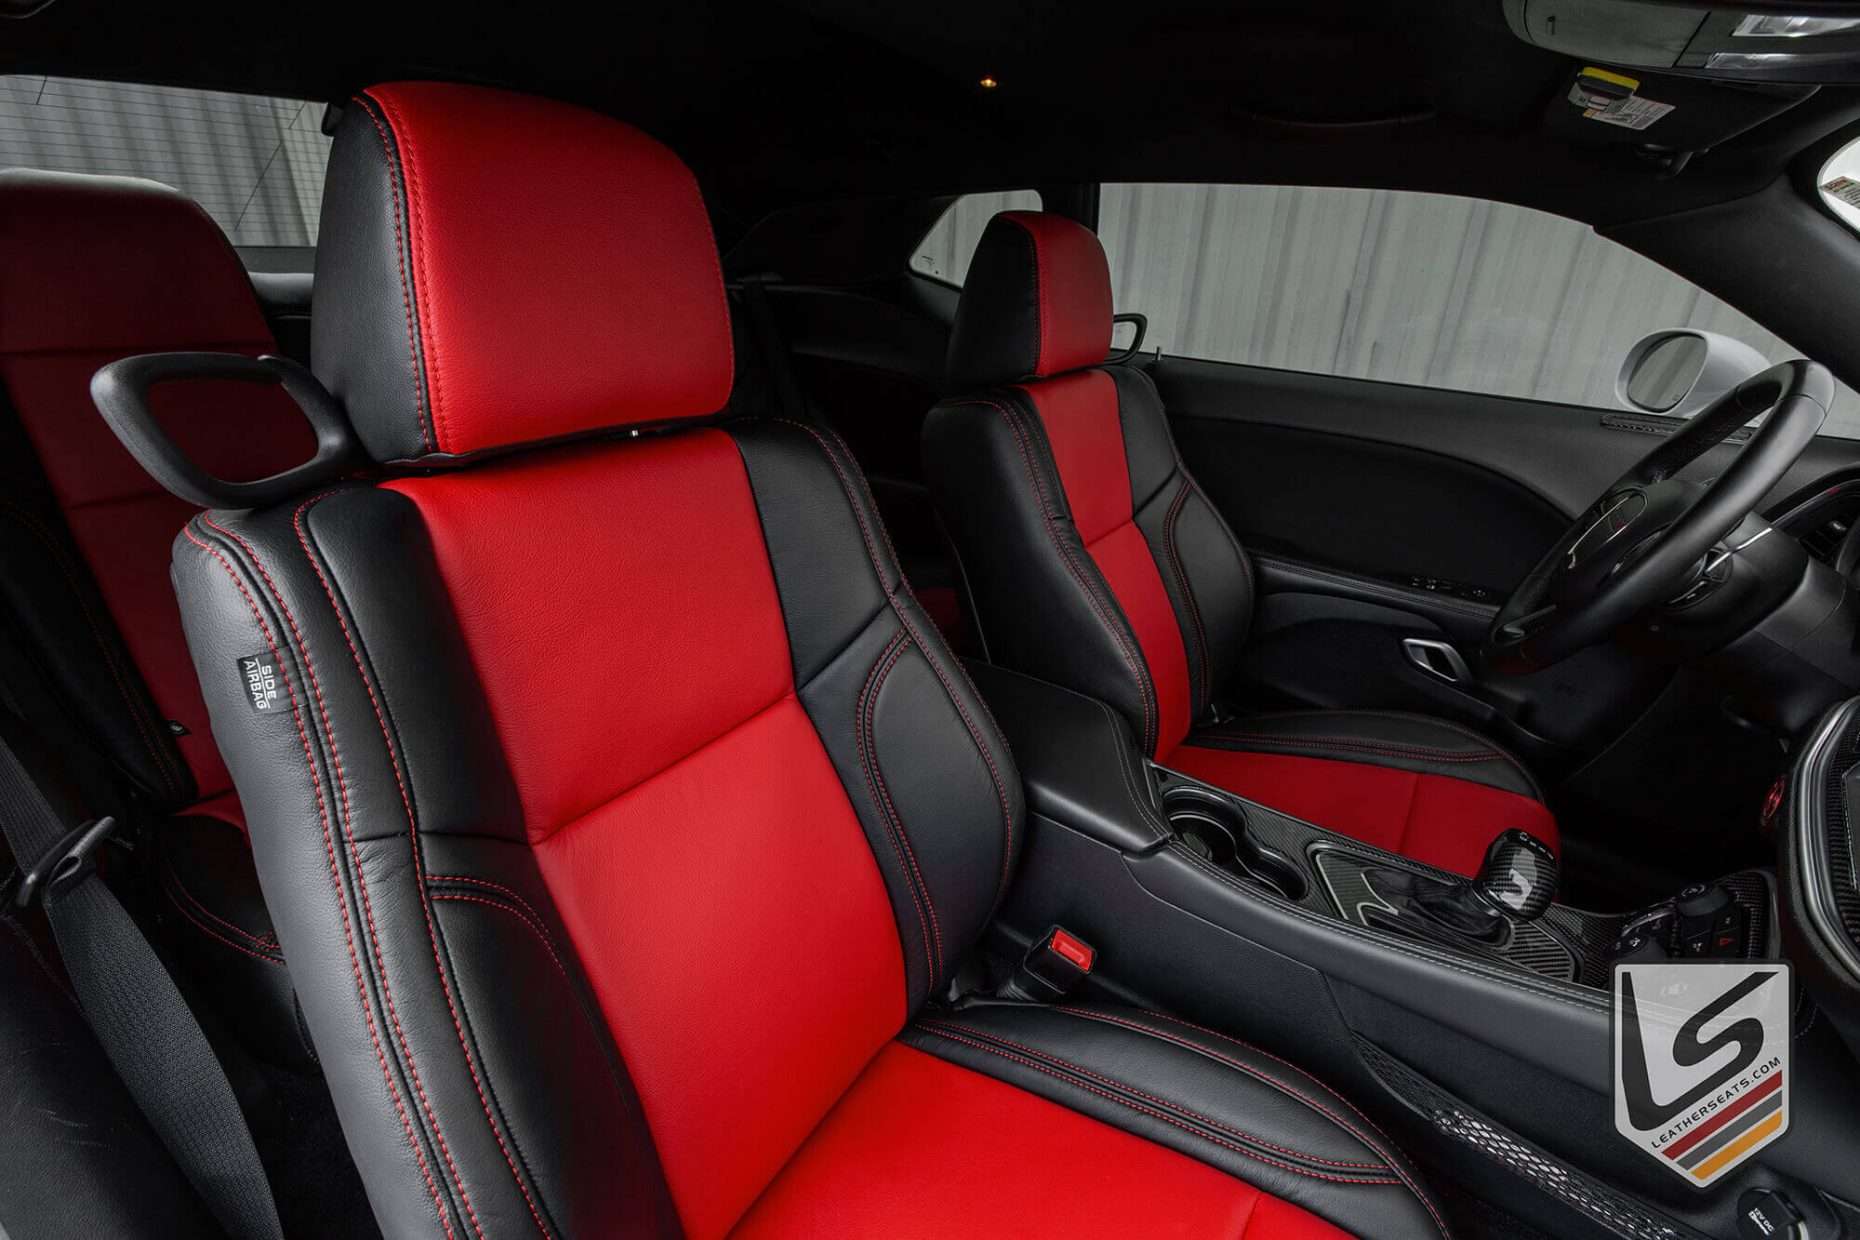 Black & Bright Red headrest and backrest section of passenger seat